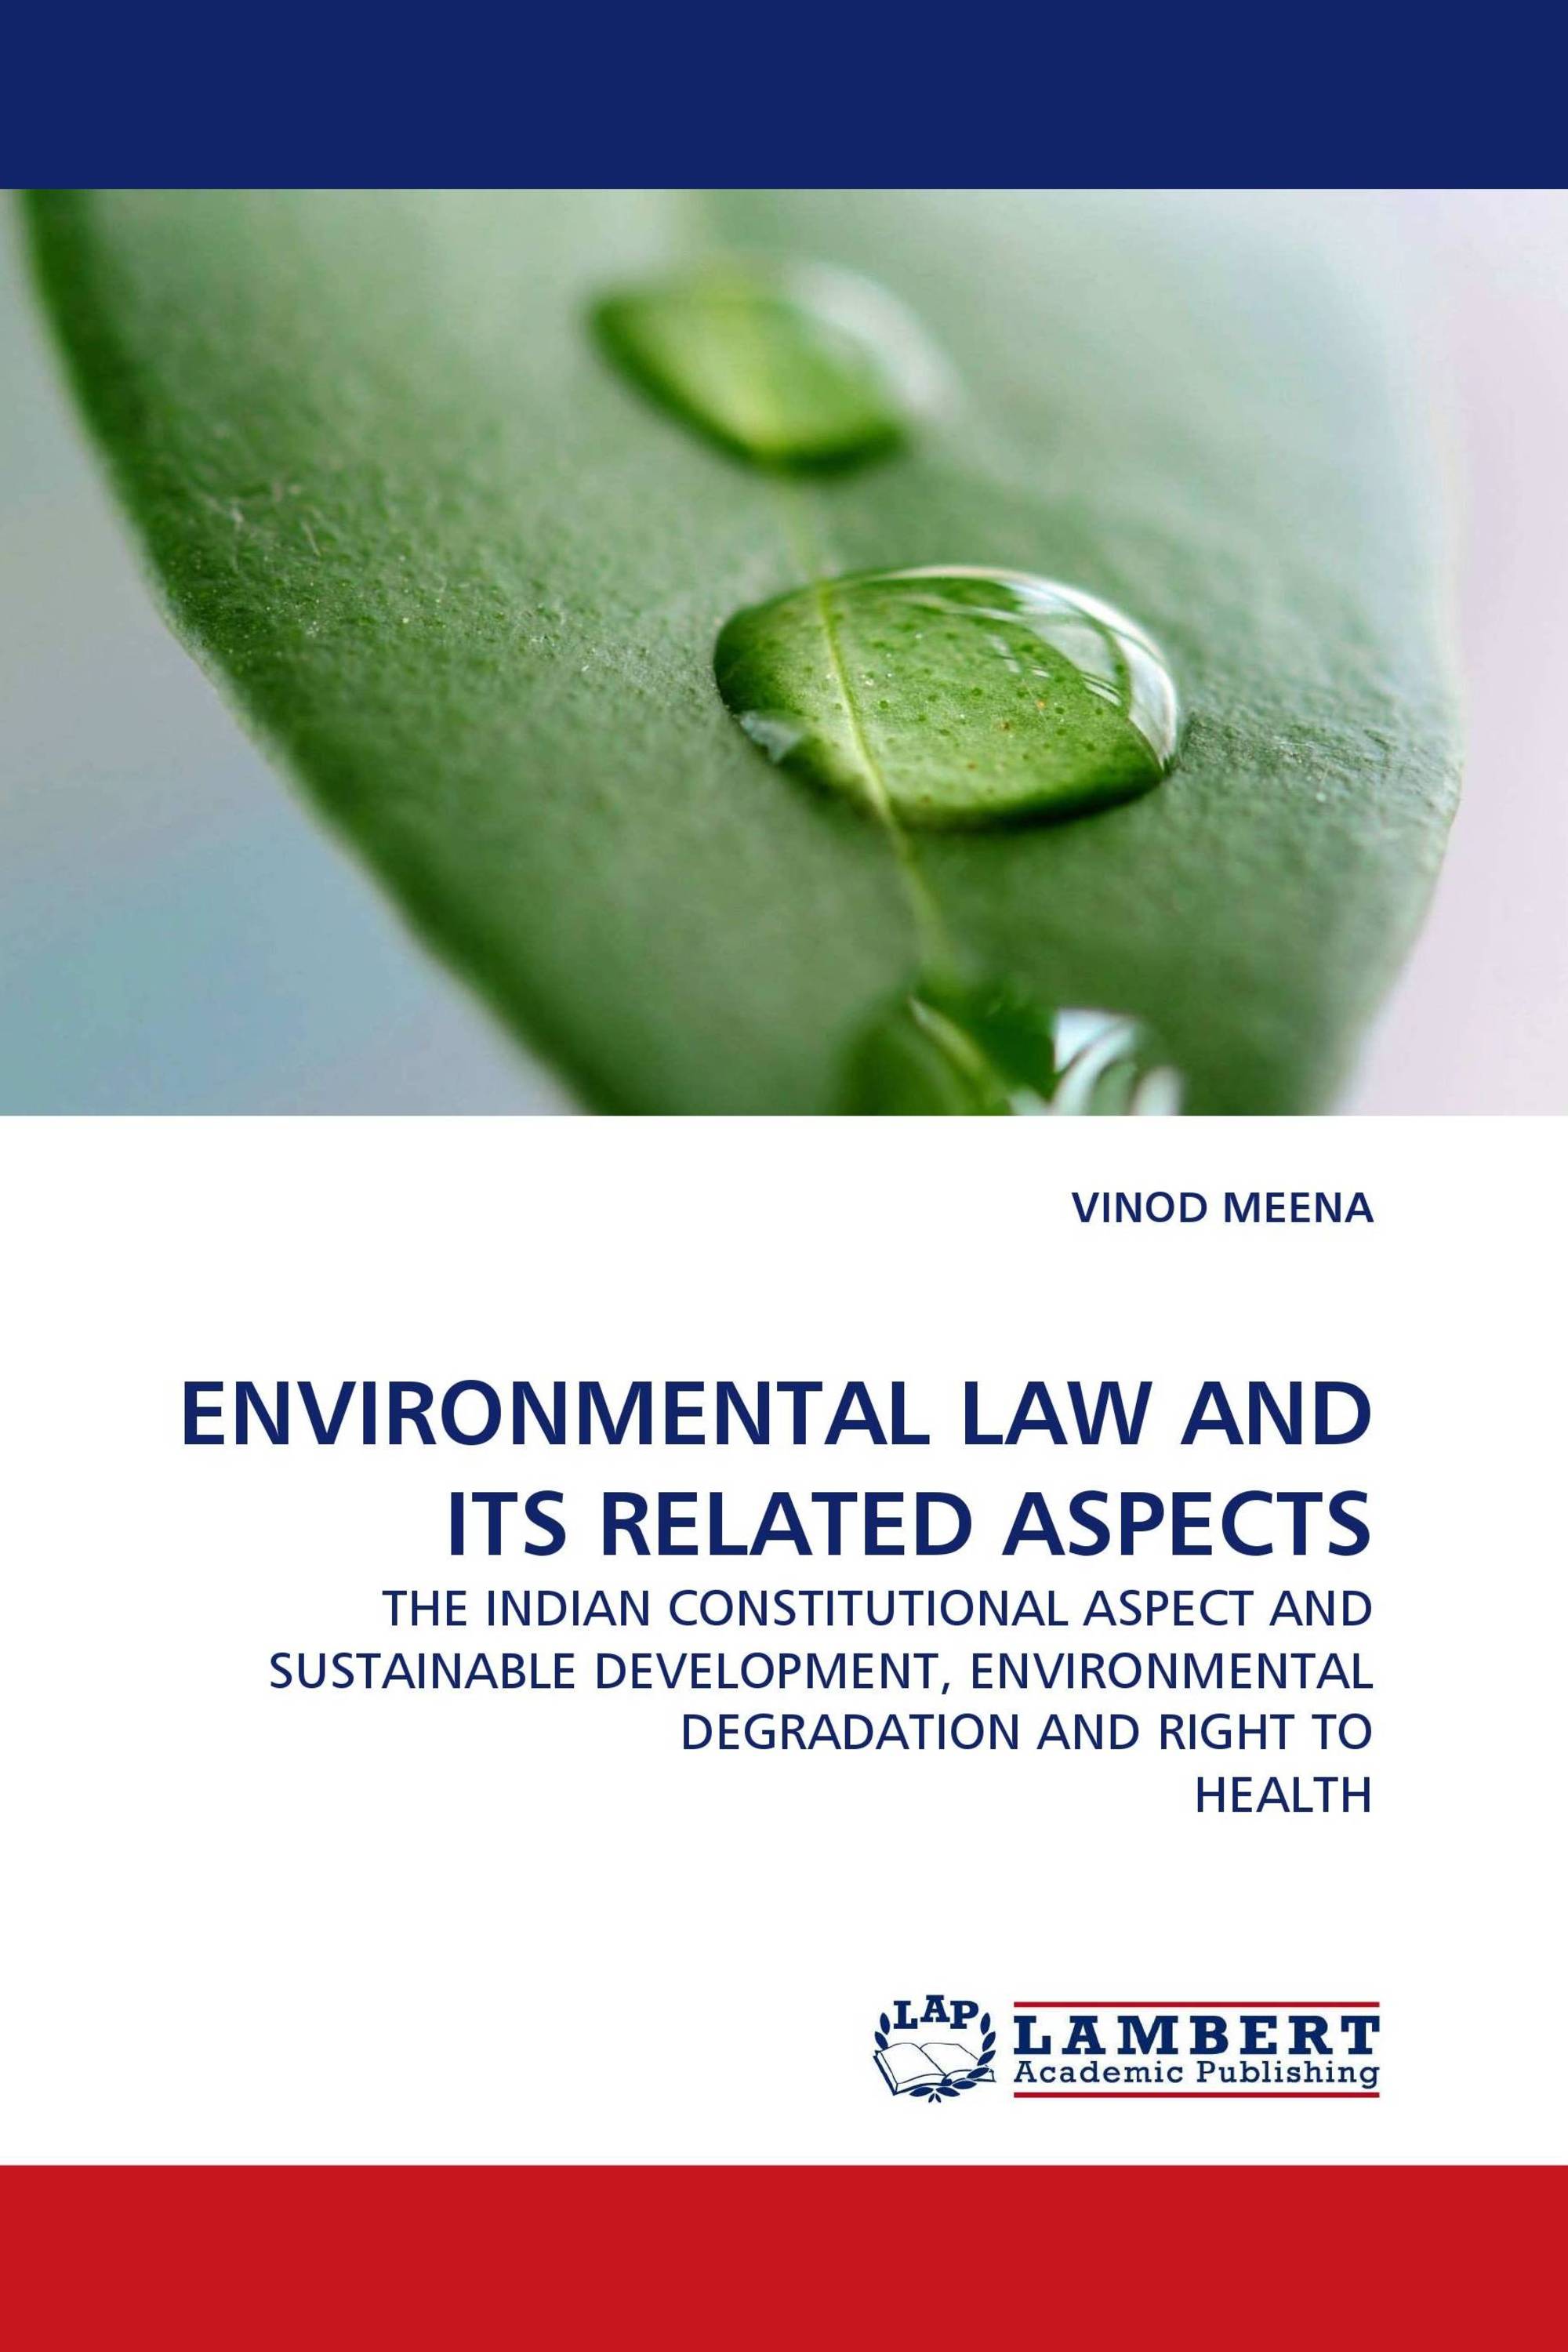 thesis topics on environmental law